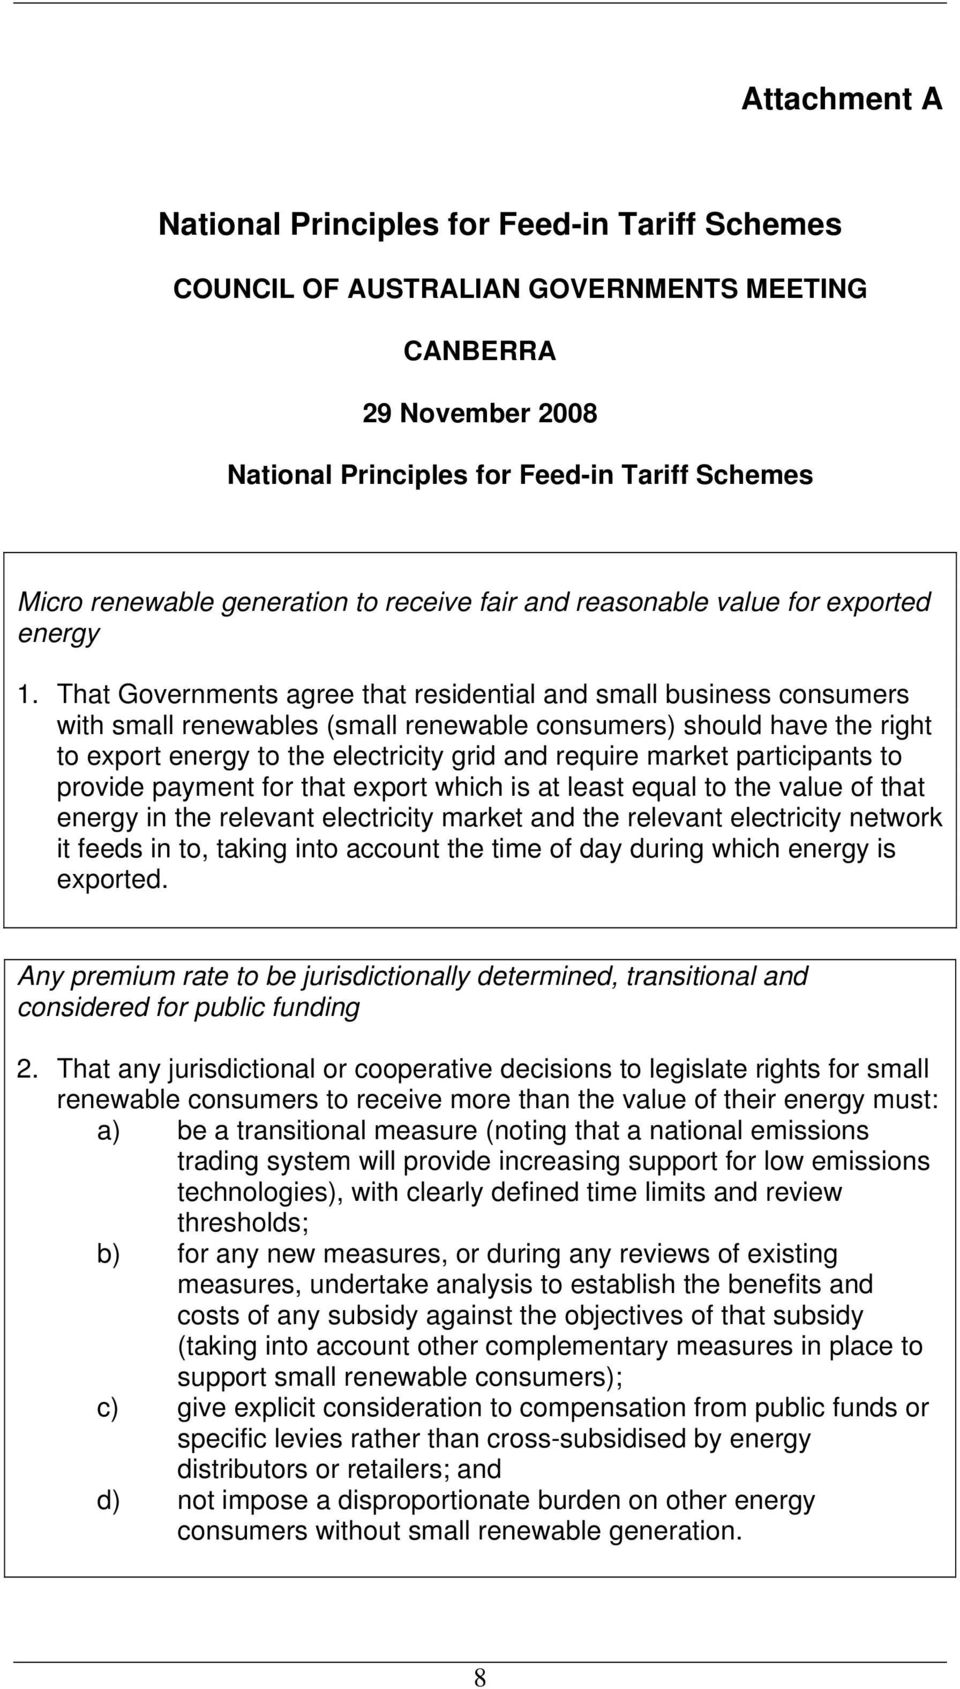 That Governments agree that residential and small business consumers with small renewables (small renewable consumers) should have the right to export energy to the electricity grid and require